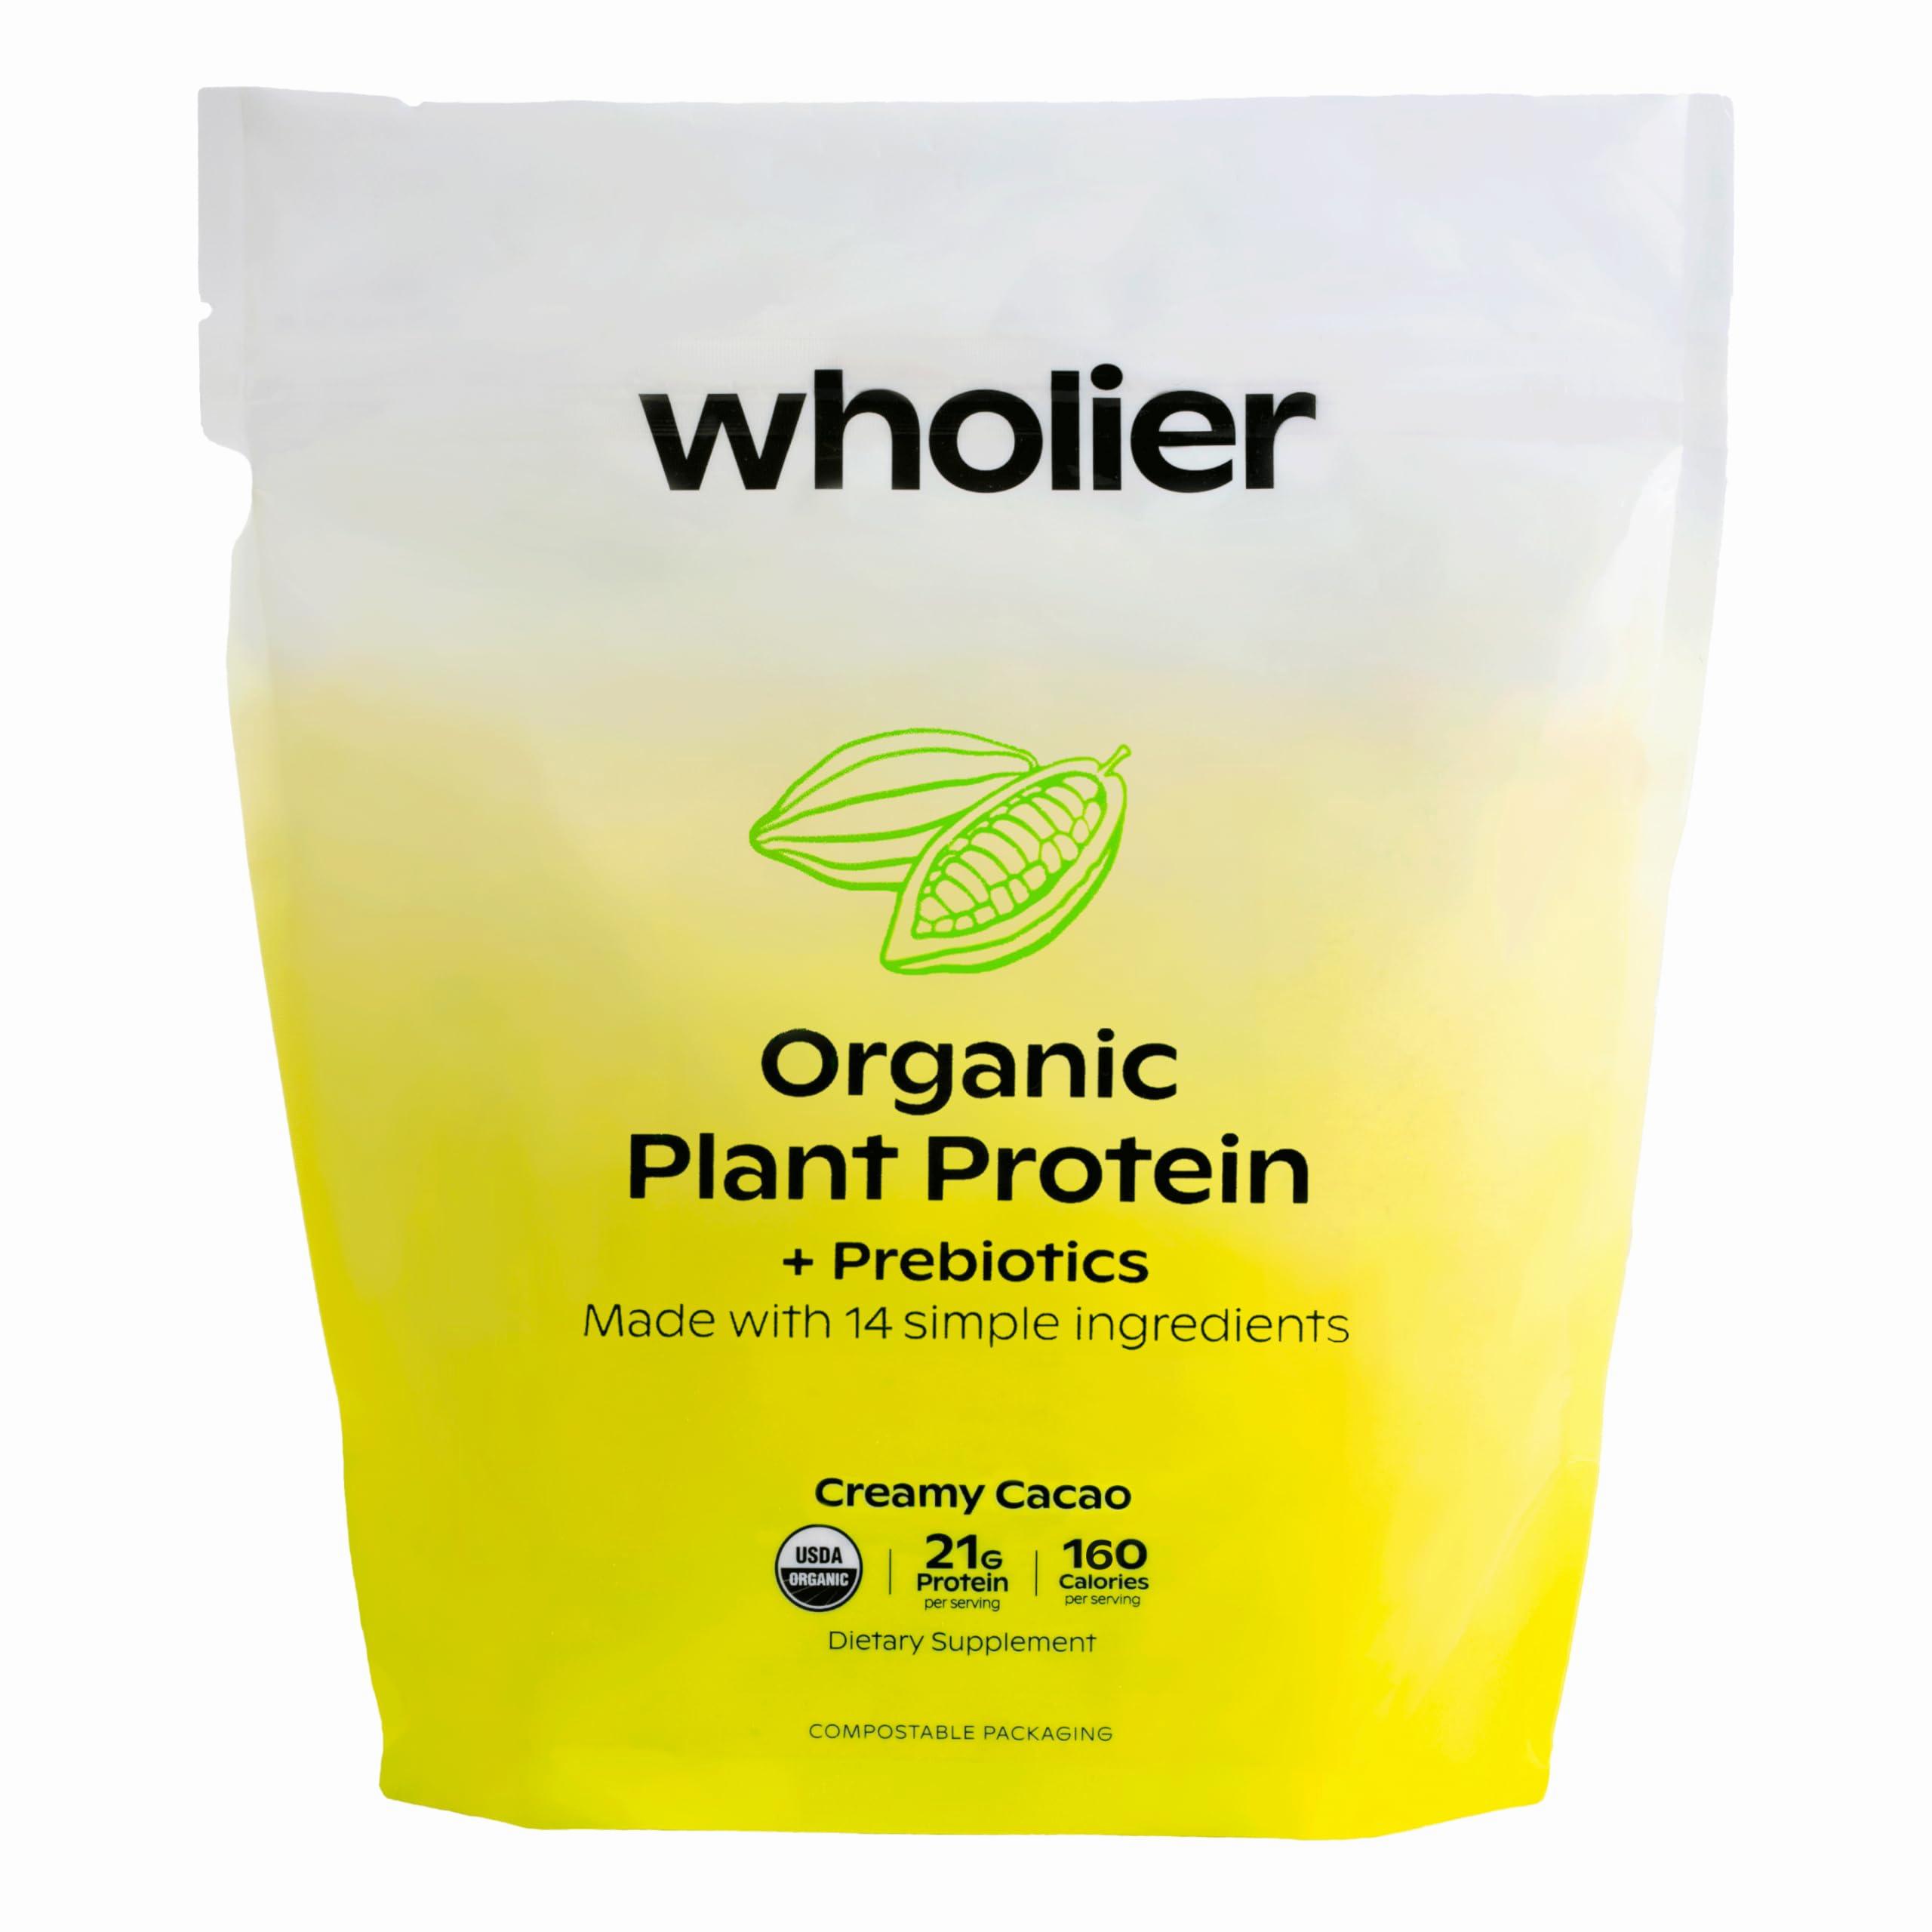 A yellow bag of Wholier Organic Plant Protein + Prebiotics powder, made with 14 simple ingredients.